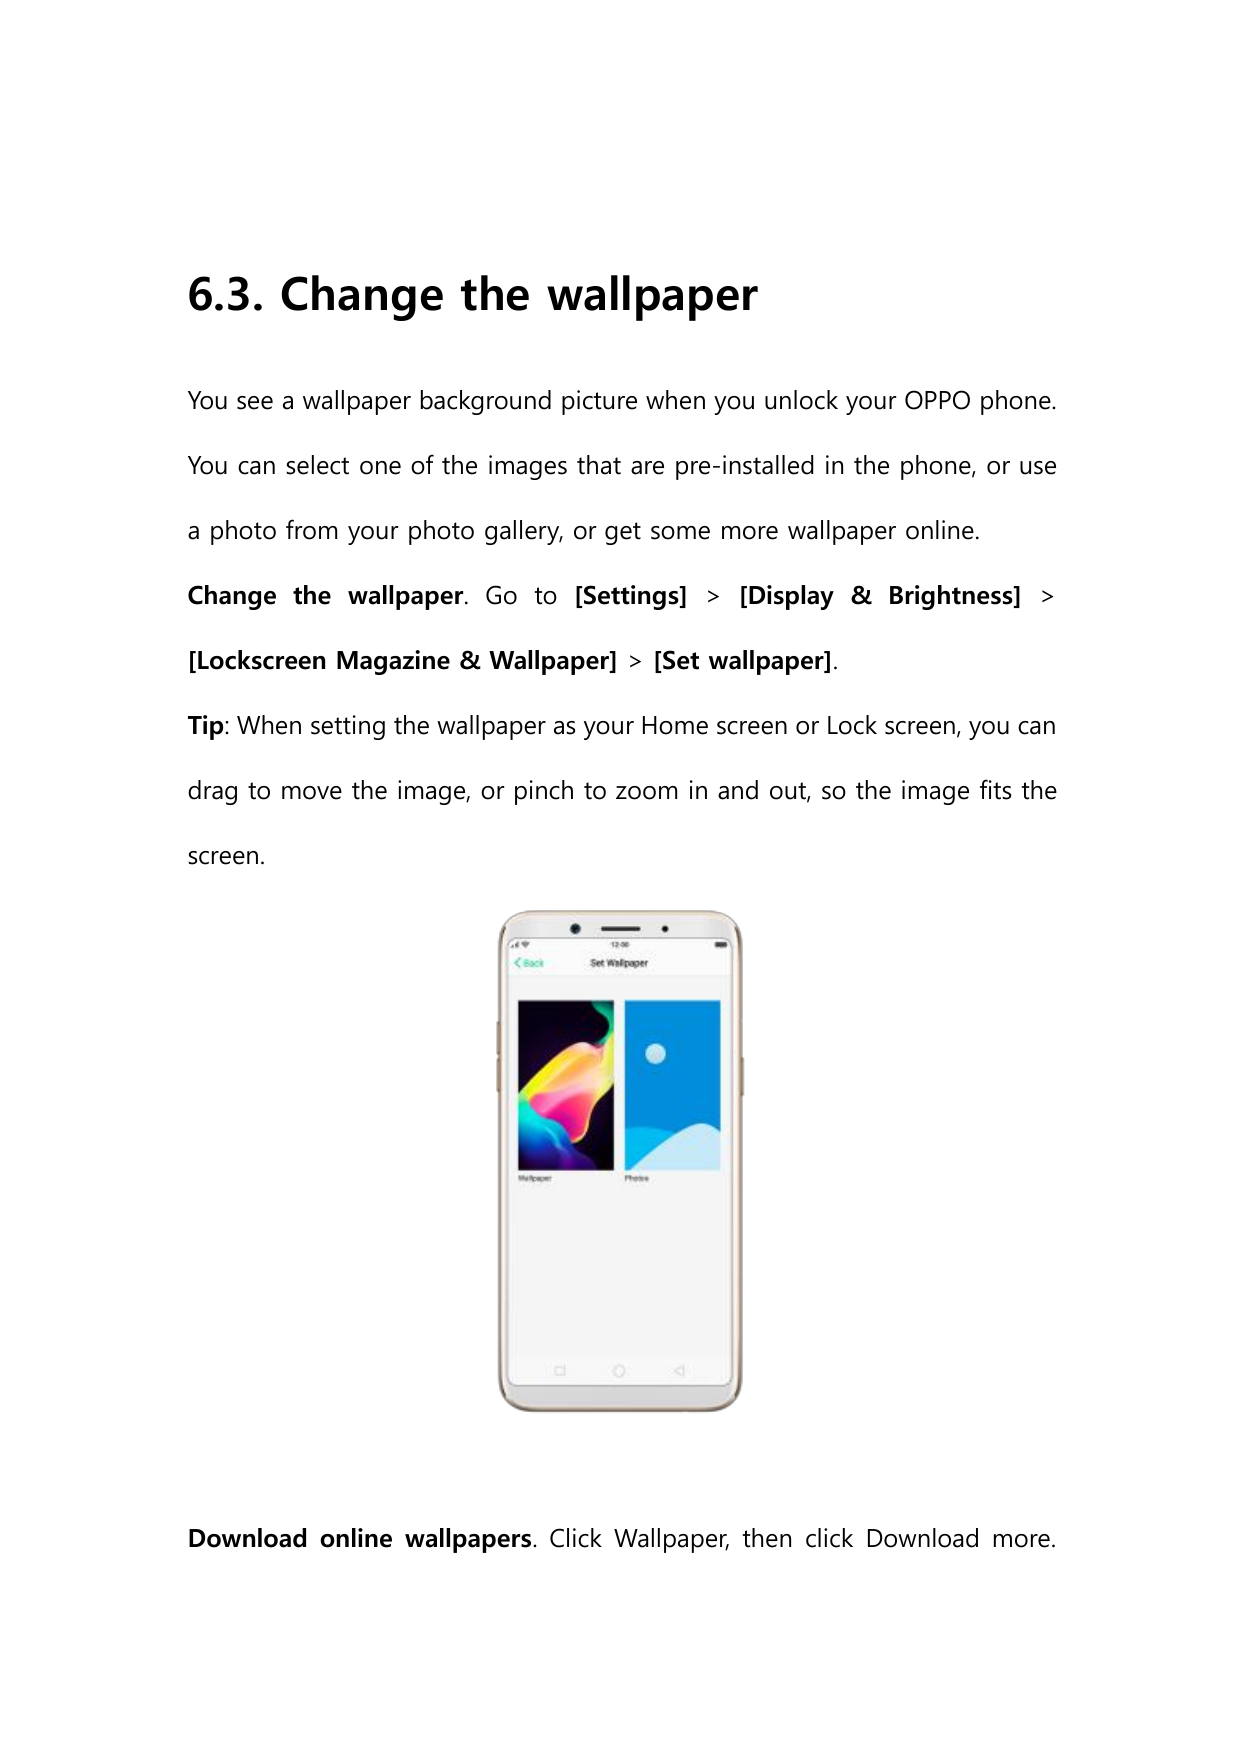 6.3. Change the wallpaperYou see a wallpaper background picture when you unlock your OPPO phone.You can select one of the images